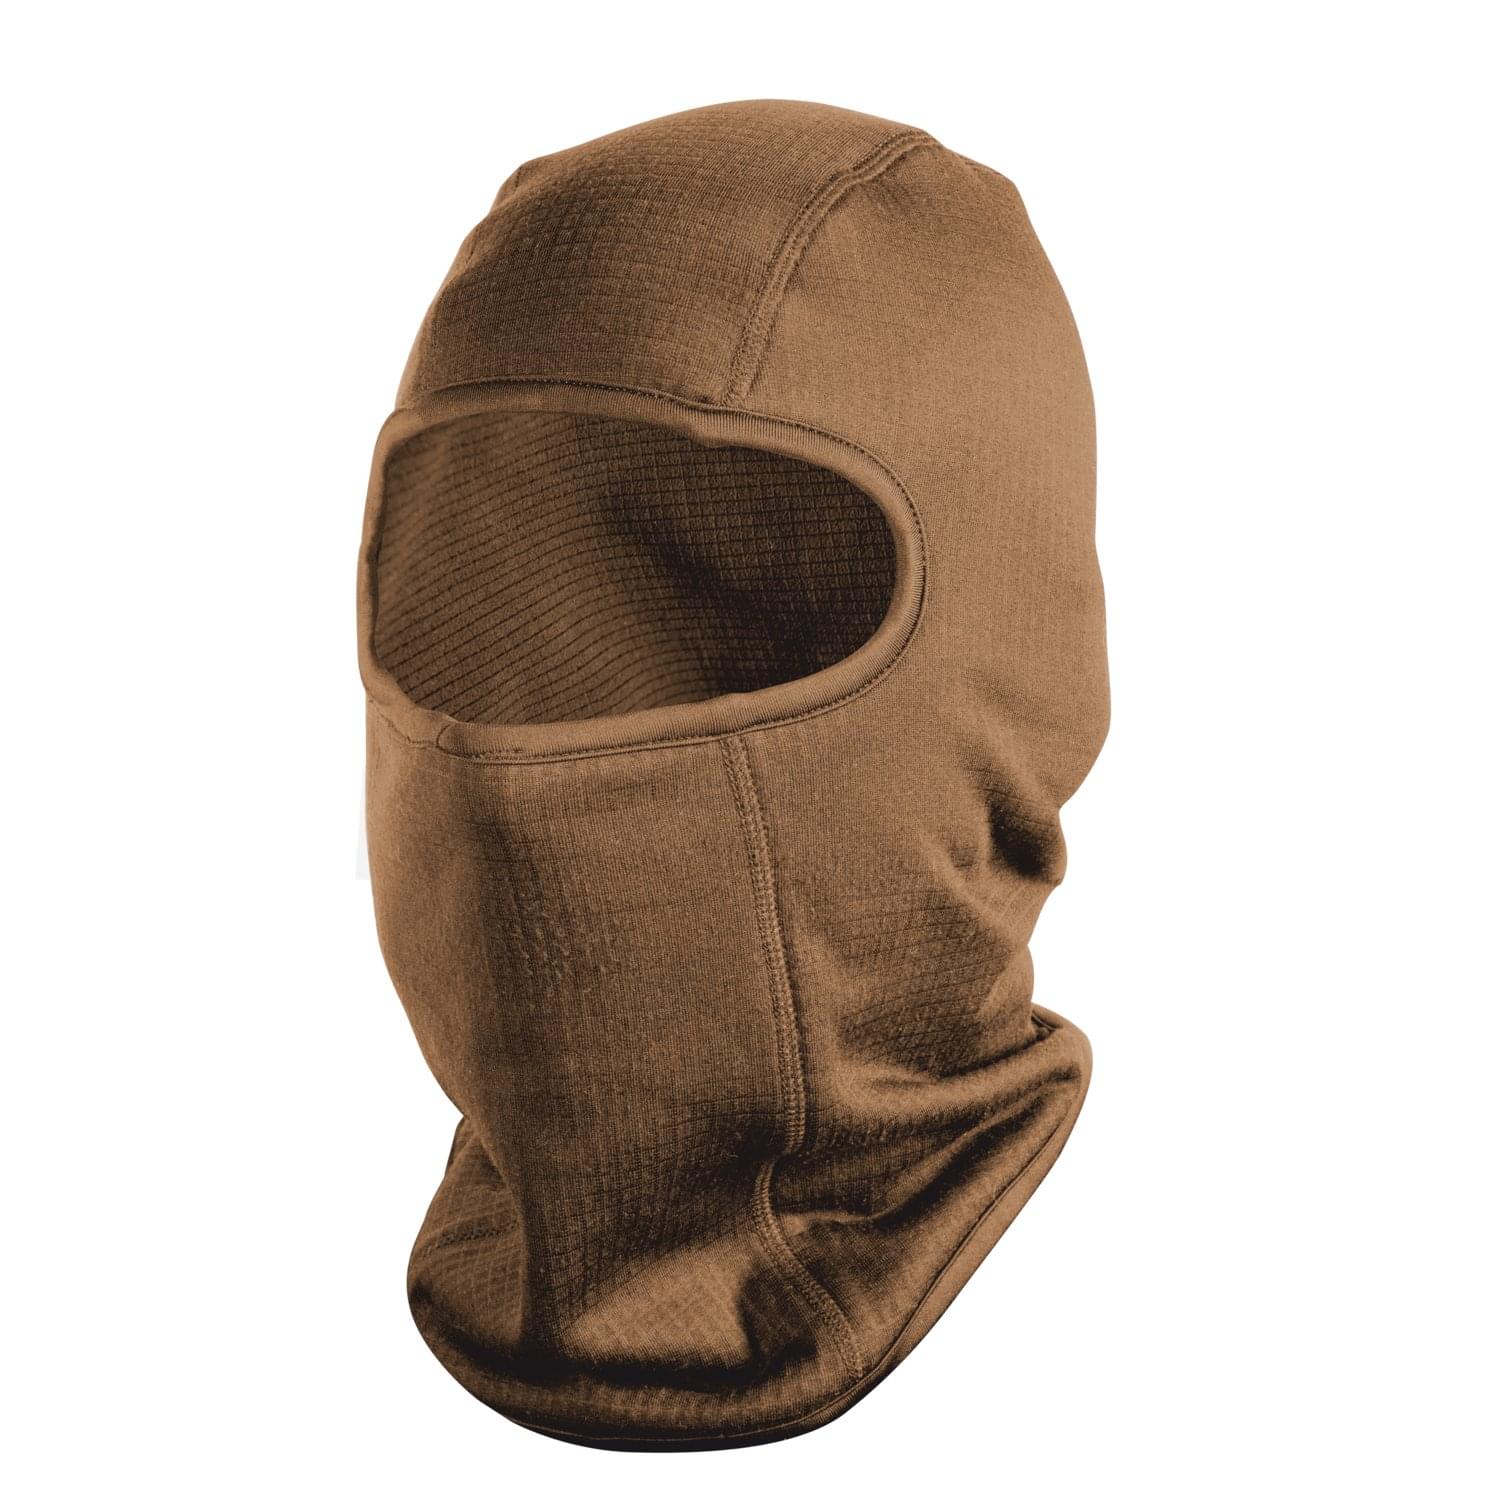 EXTREME COLD WEATHER BALACLAVA - COMFORTDRY® - Coyote